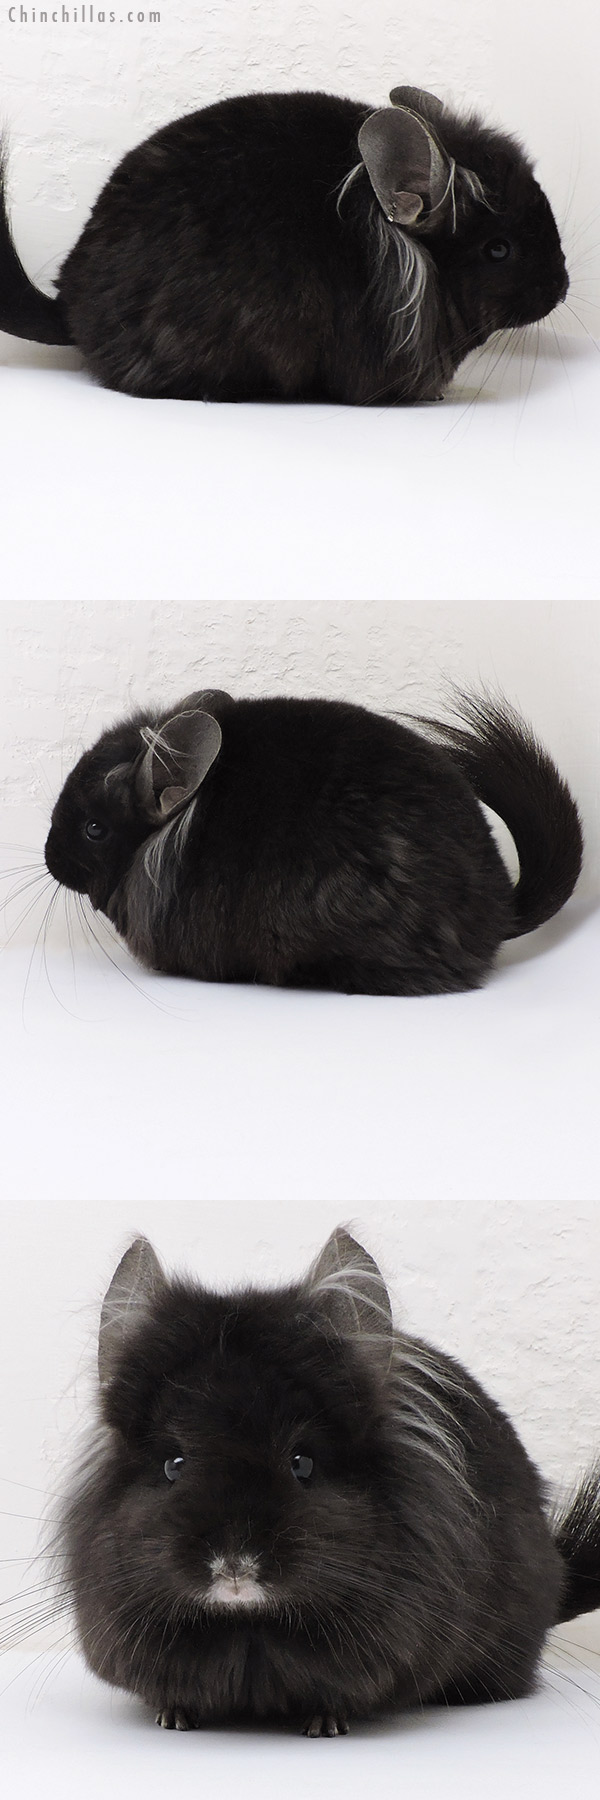 Chinchilla or related item offered for sale or export on Chinchillas.com - 18234 Ebony ( Locken Carrier ) G2  Royal Persian Angora Female Chinchilla